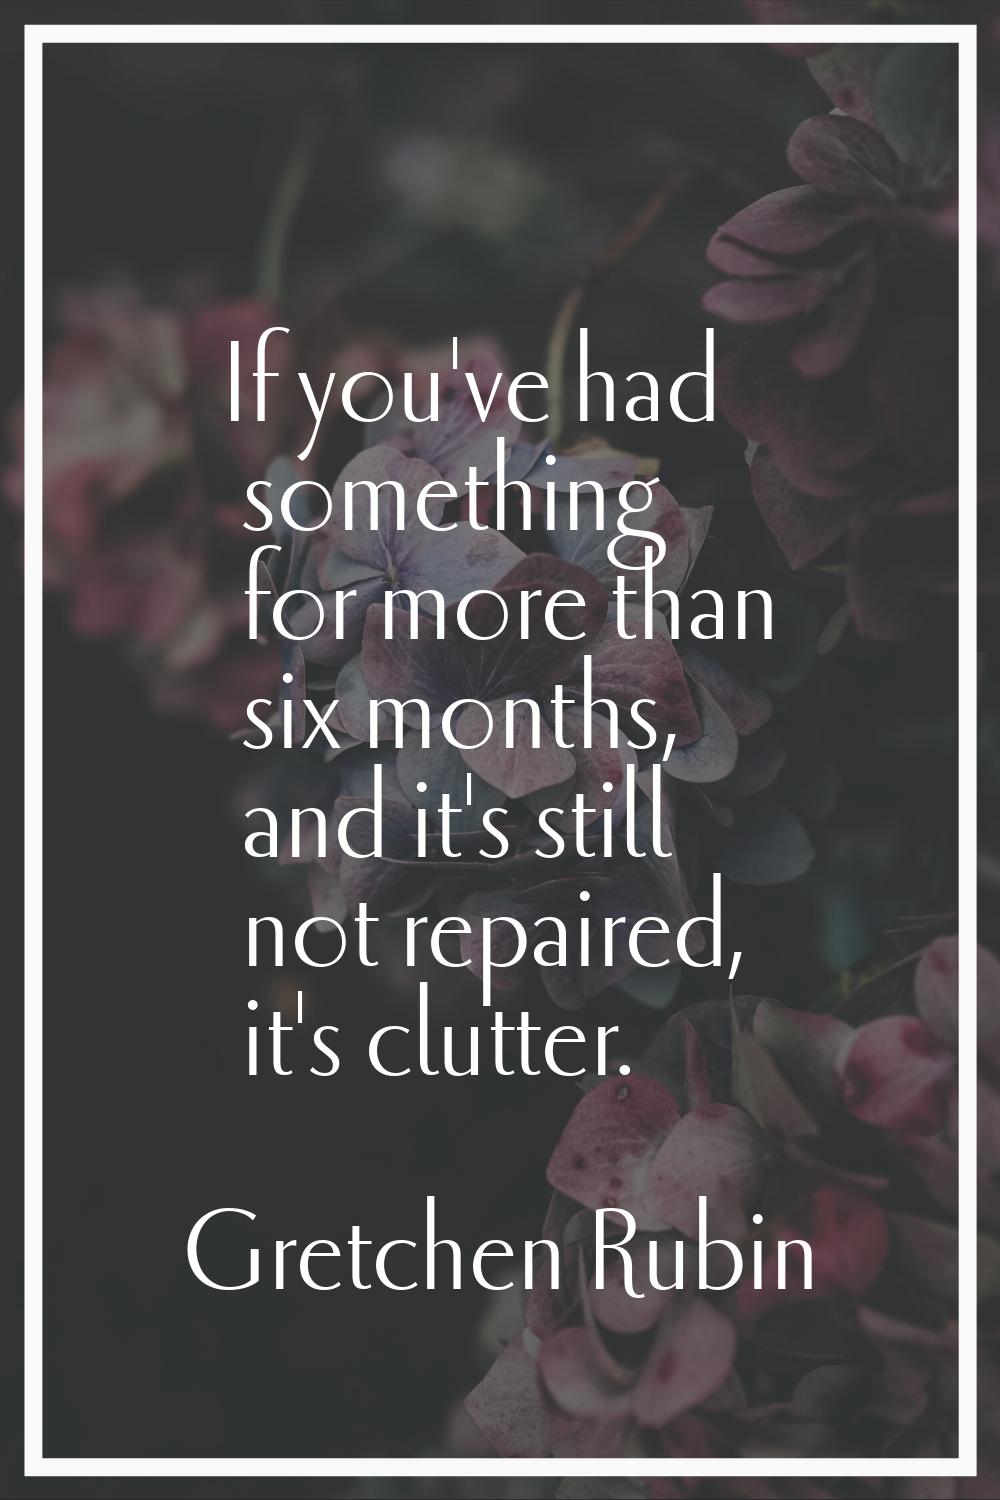 If you've had something for more than six months, and it's still not repaired, it's clutter.